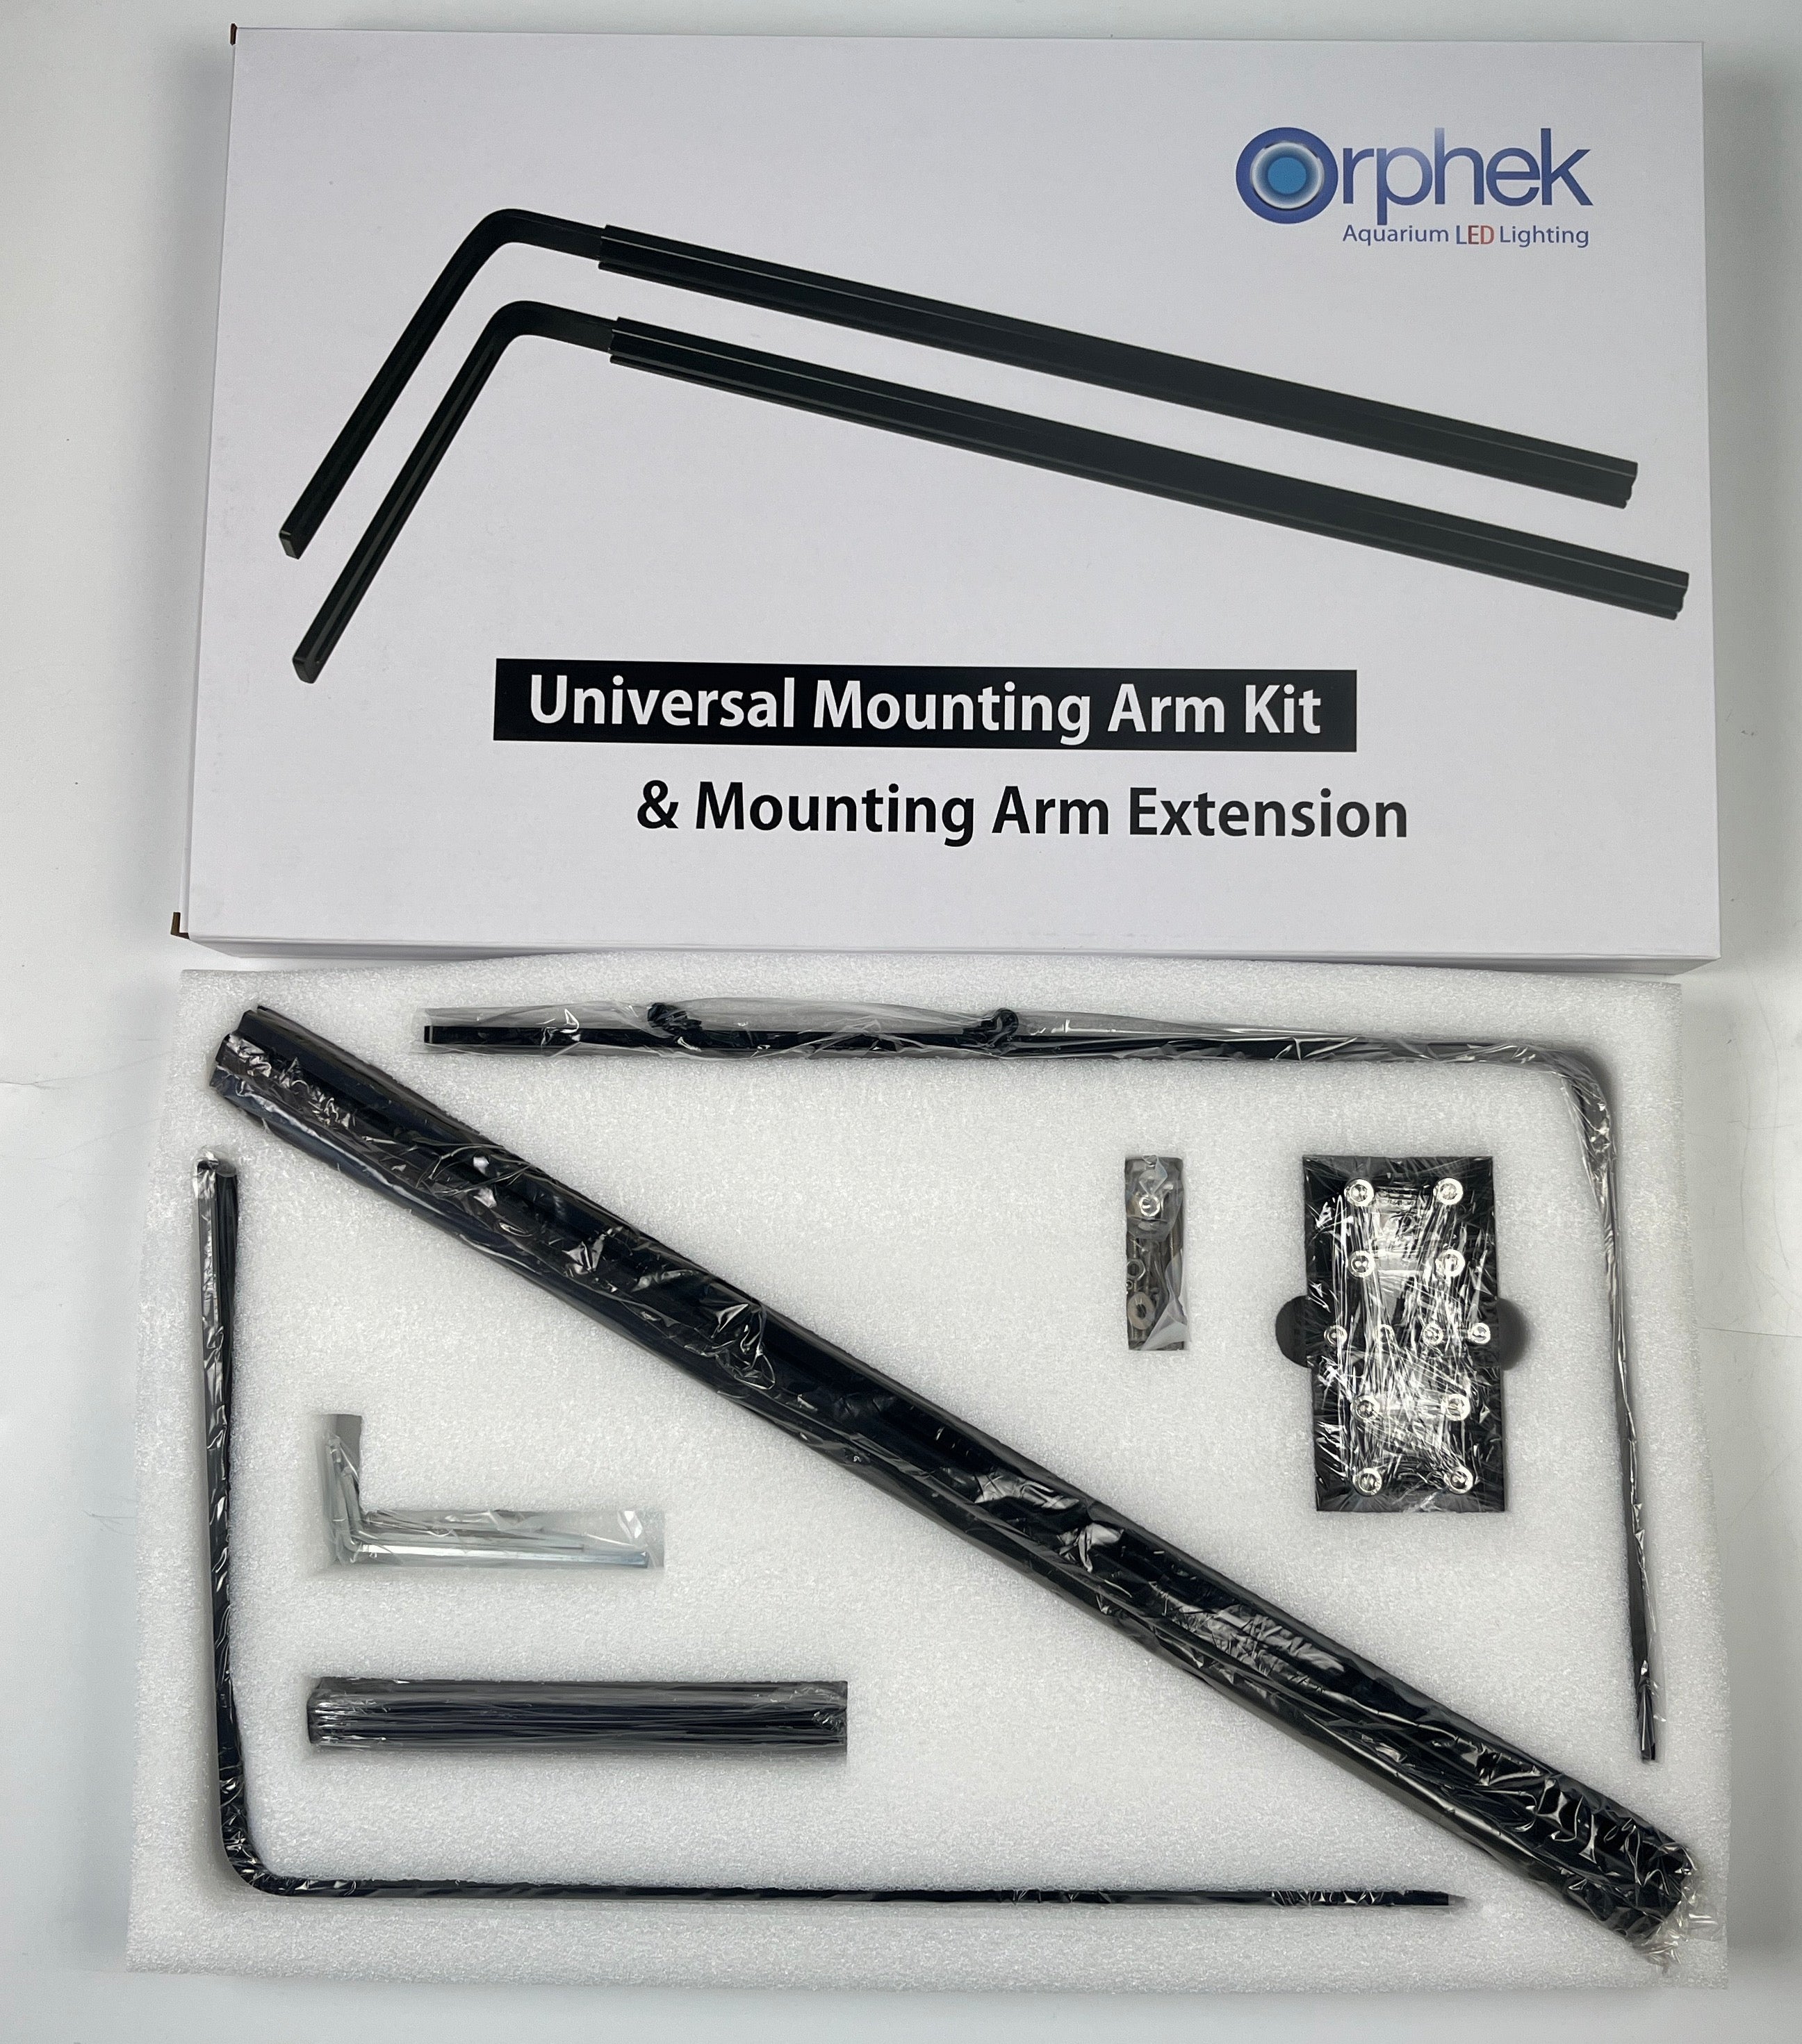 Combo Mounting Arm Kit & Mounting Arm Extension Kits